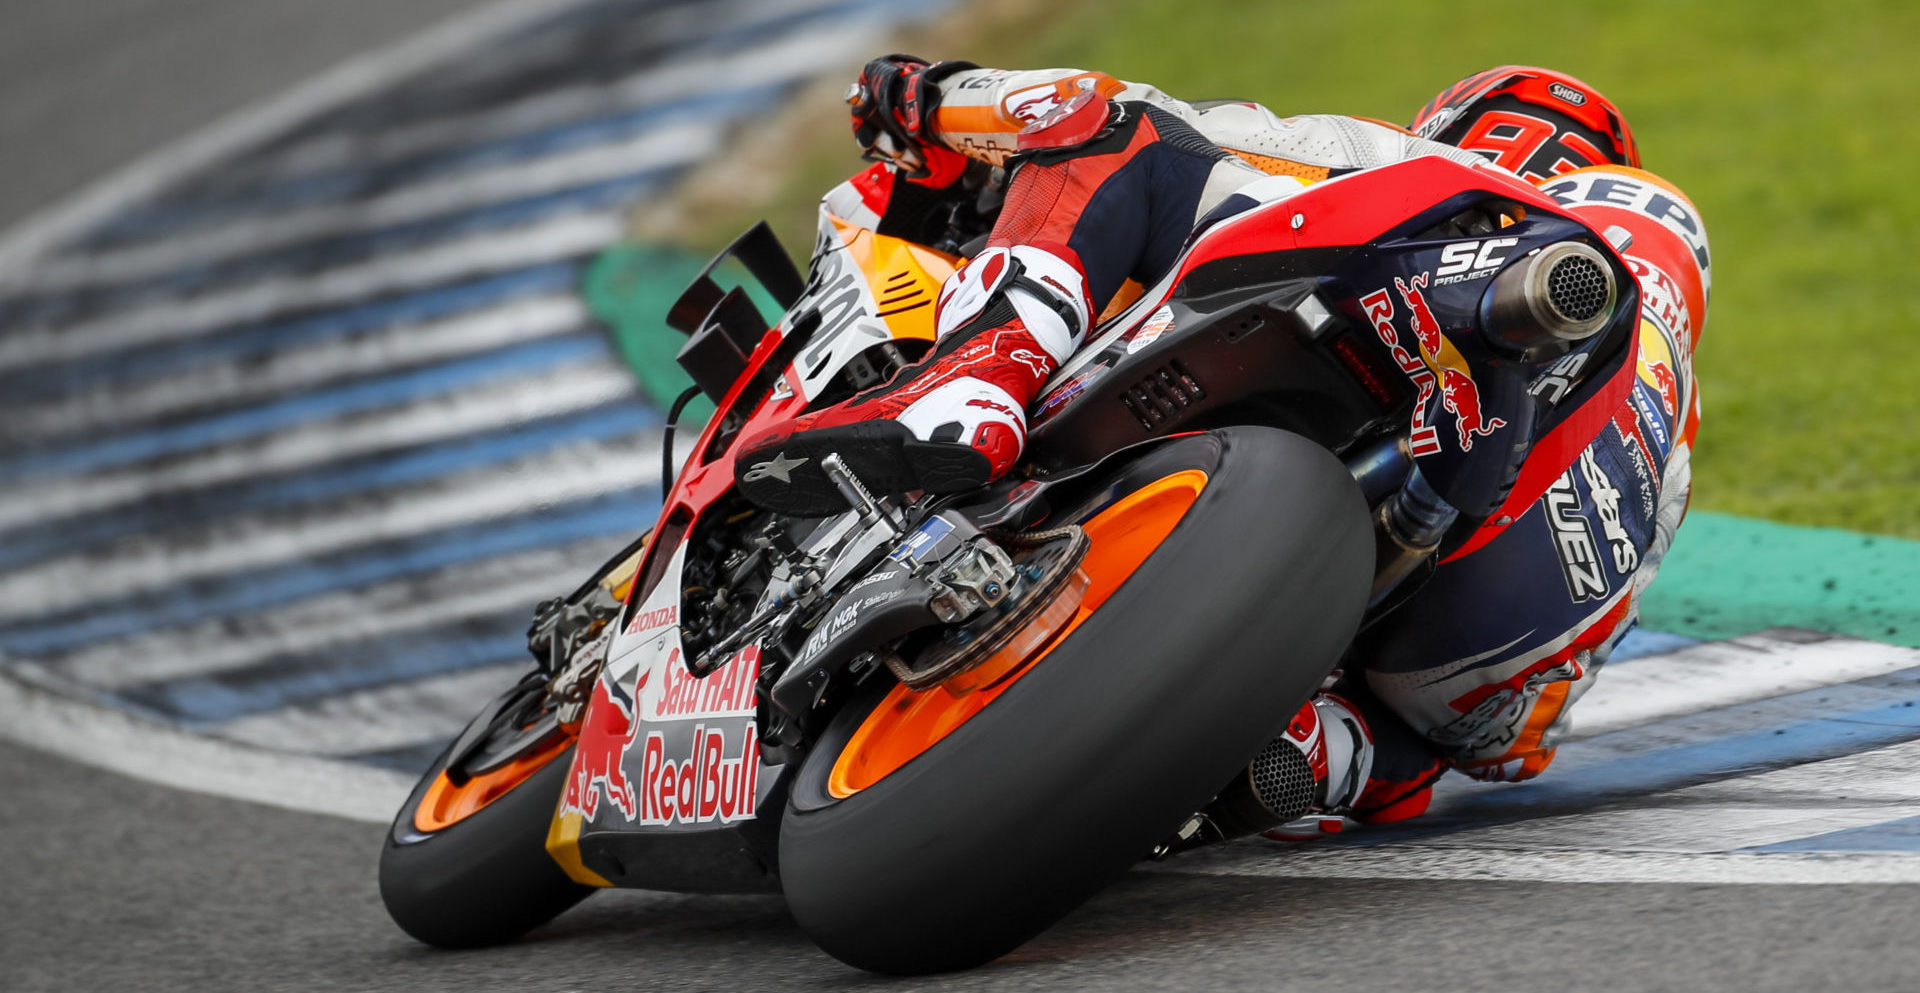 Marquez now 'looking for final three tenths' on Ducati MotoGP bike